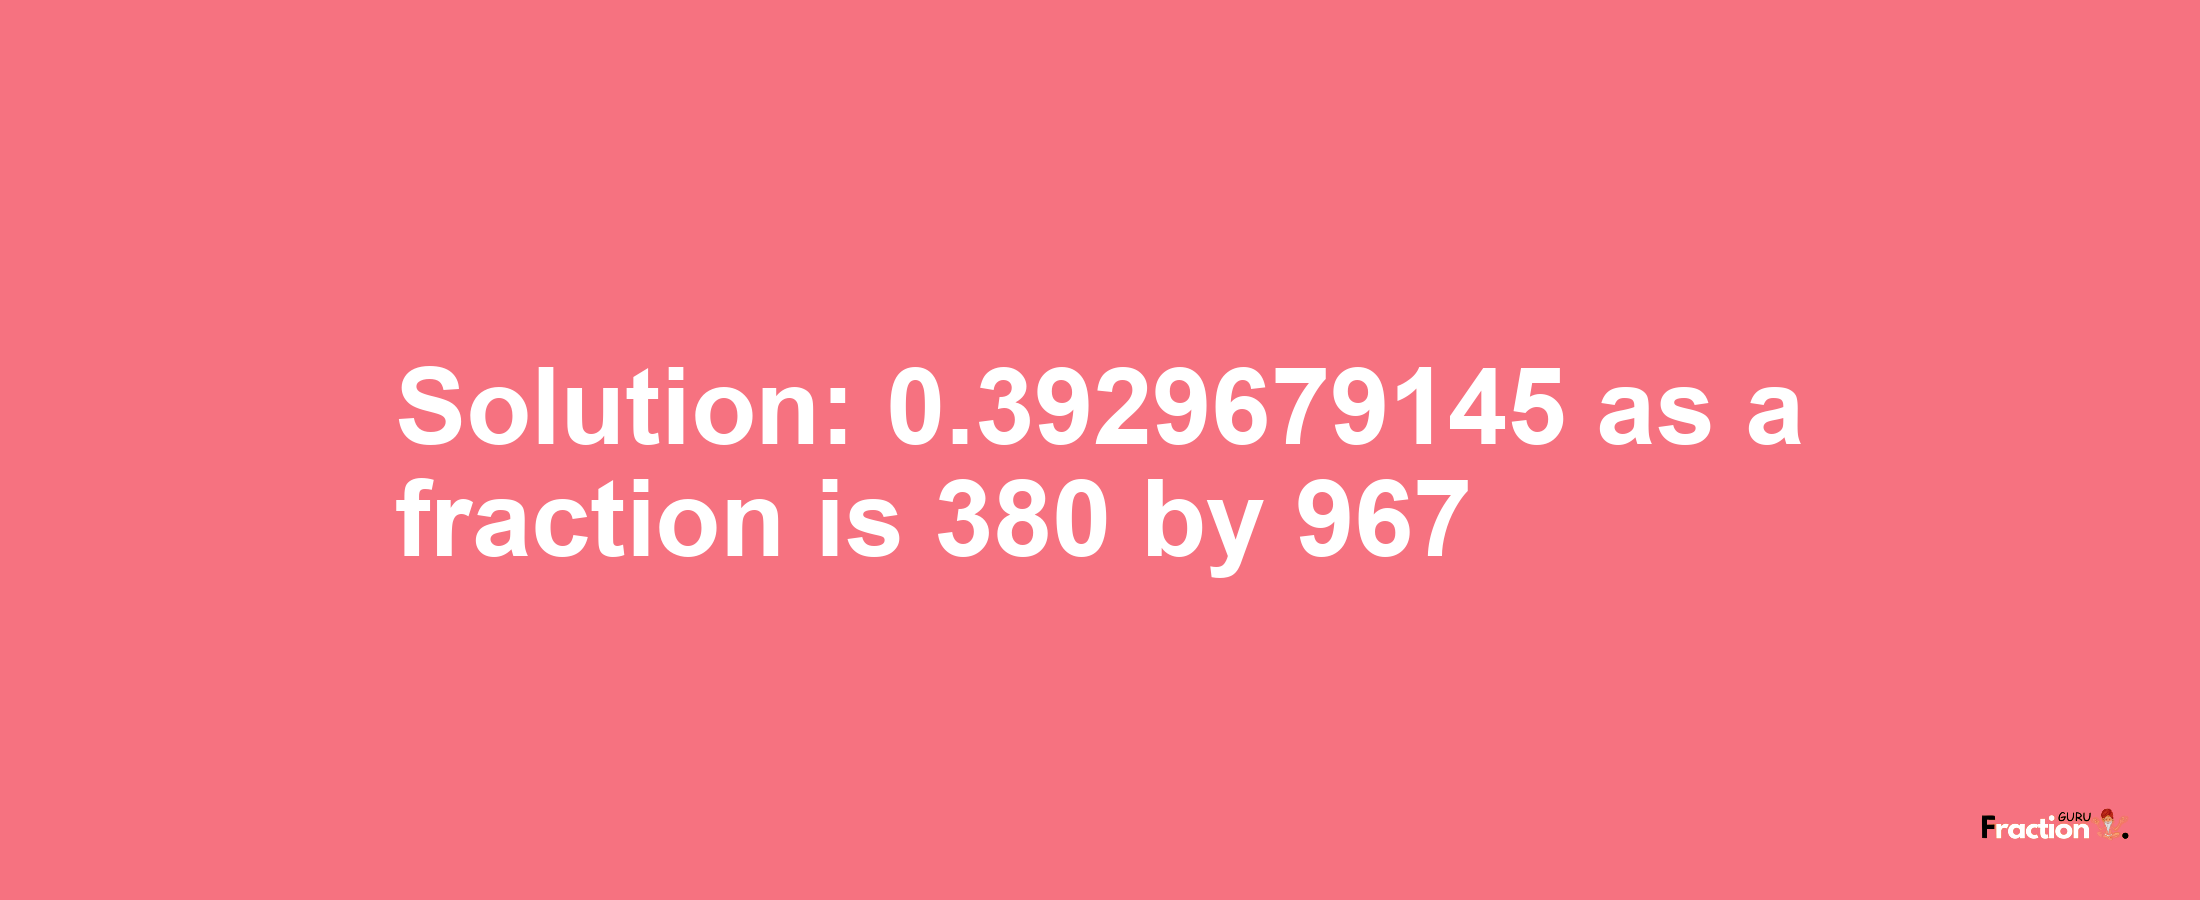 Solution:0.3929679145 as a fraction is 380/967